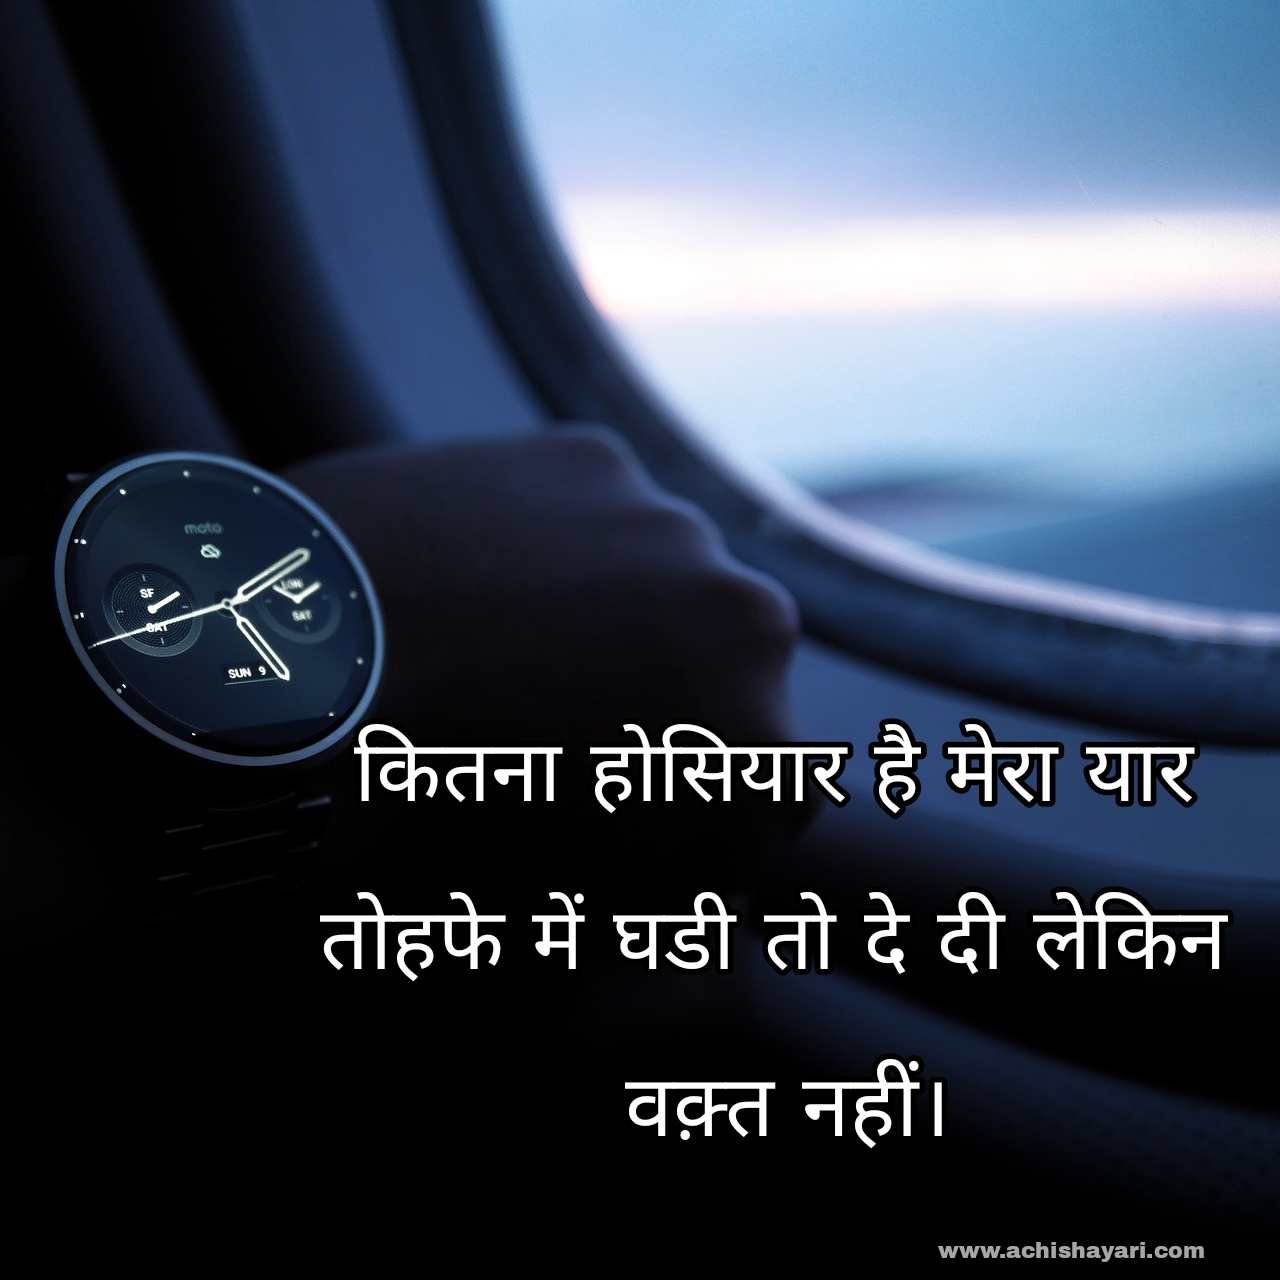 Motivational Quotes in Hindi for Success